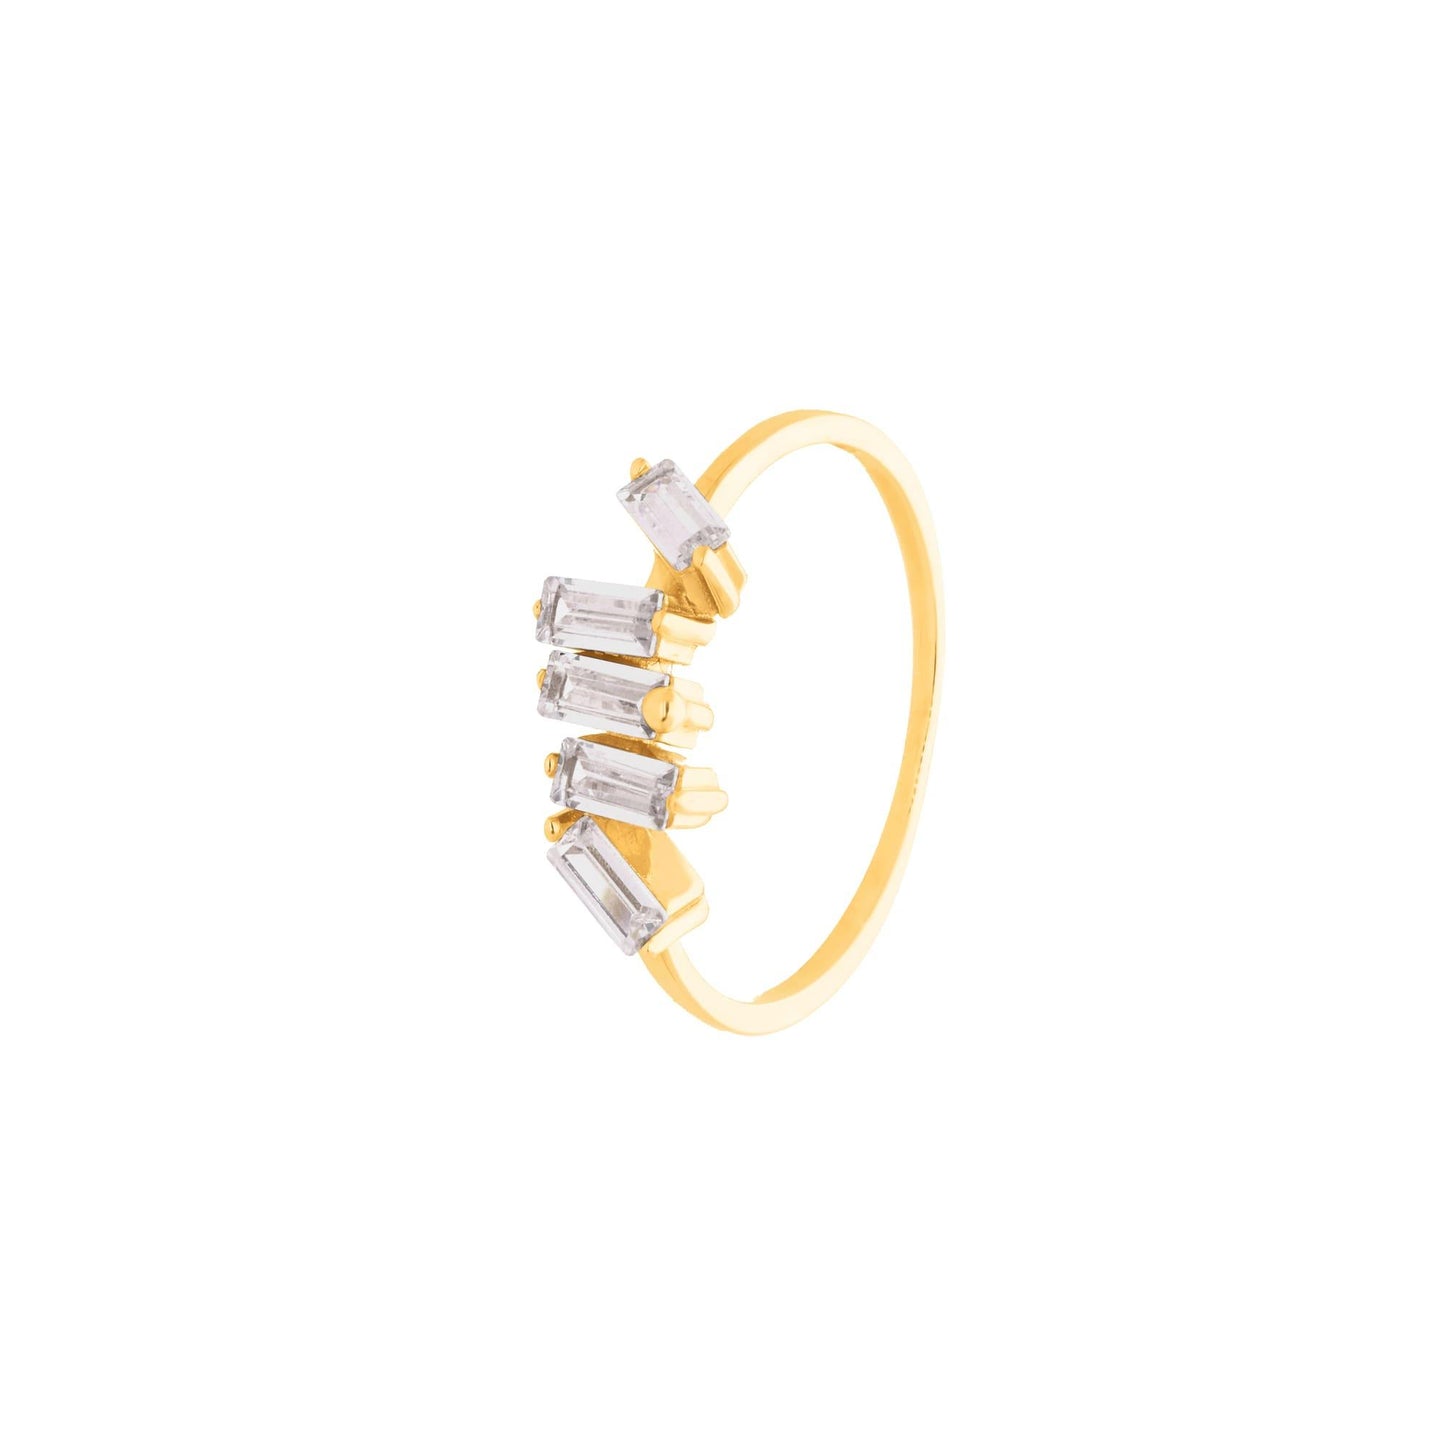 Kristall Baguette Ring - suzangold